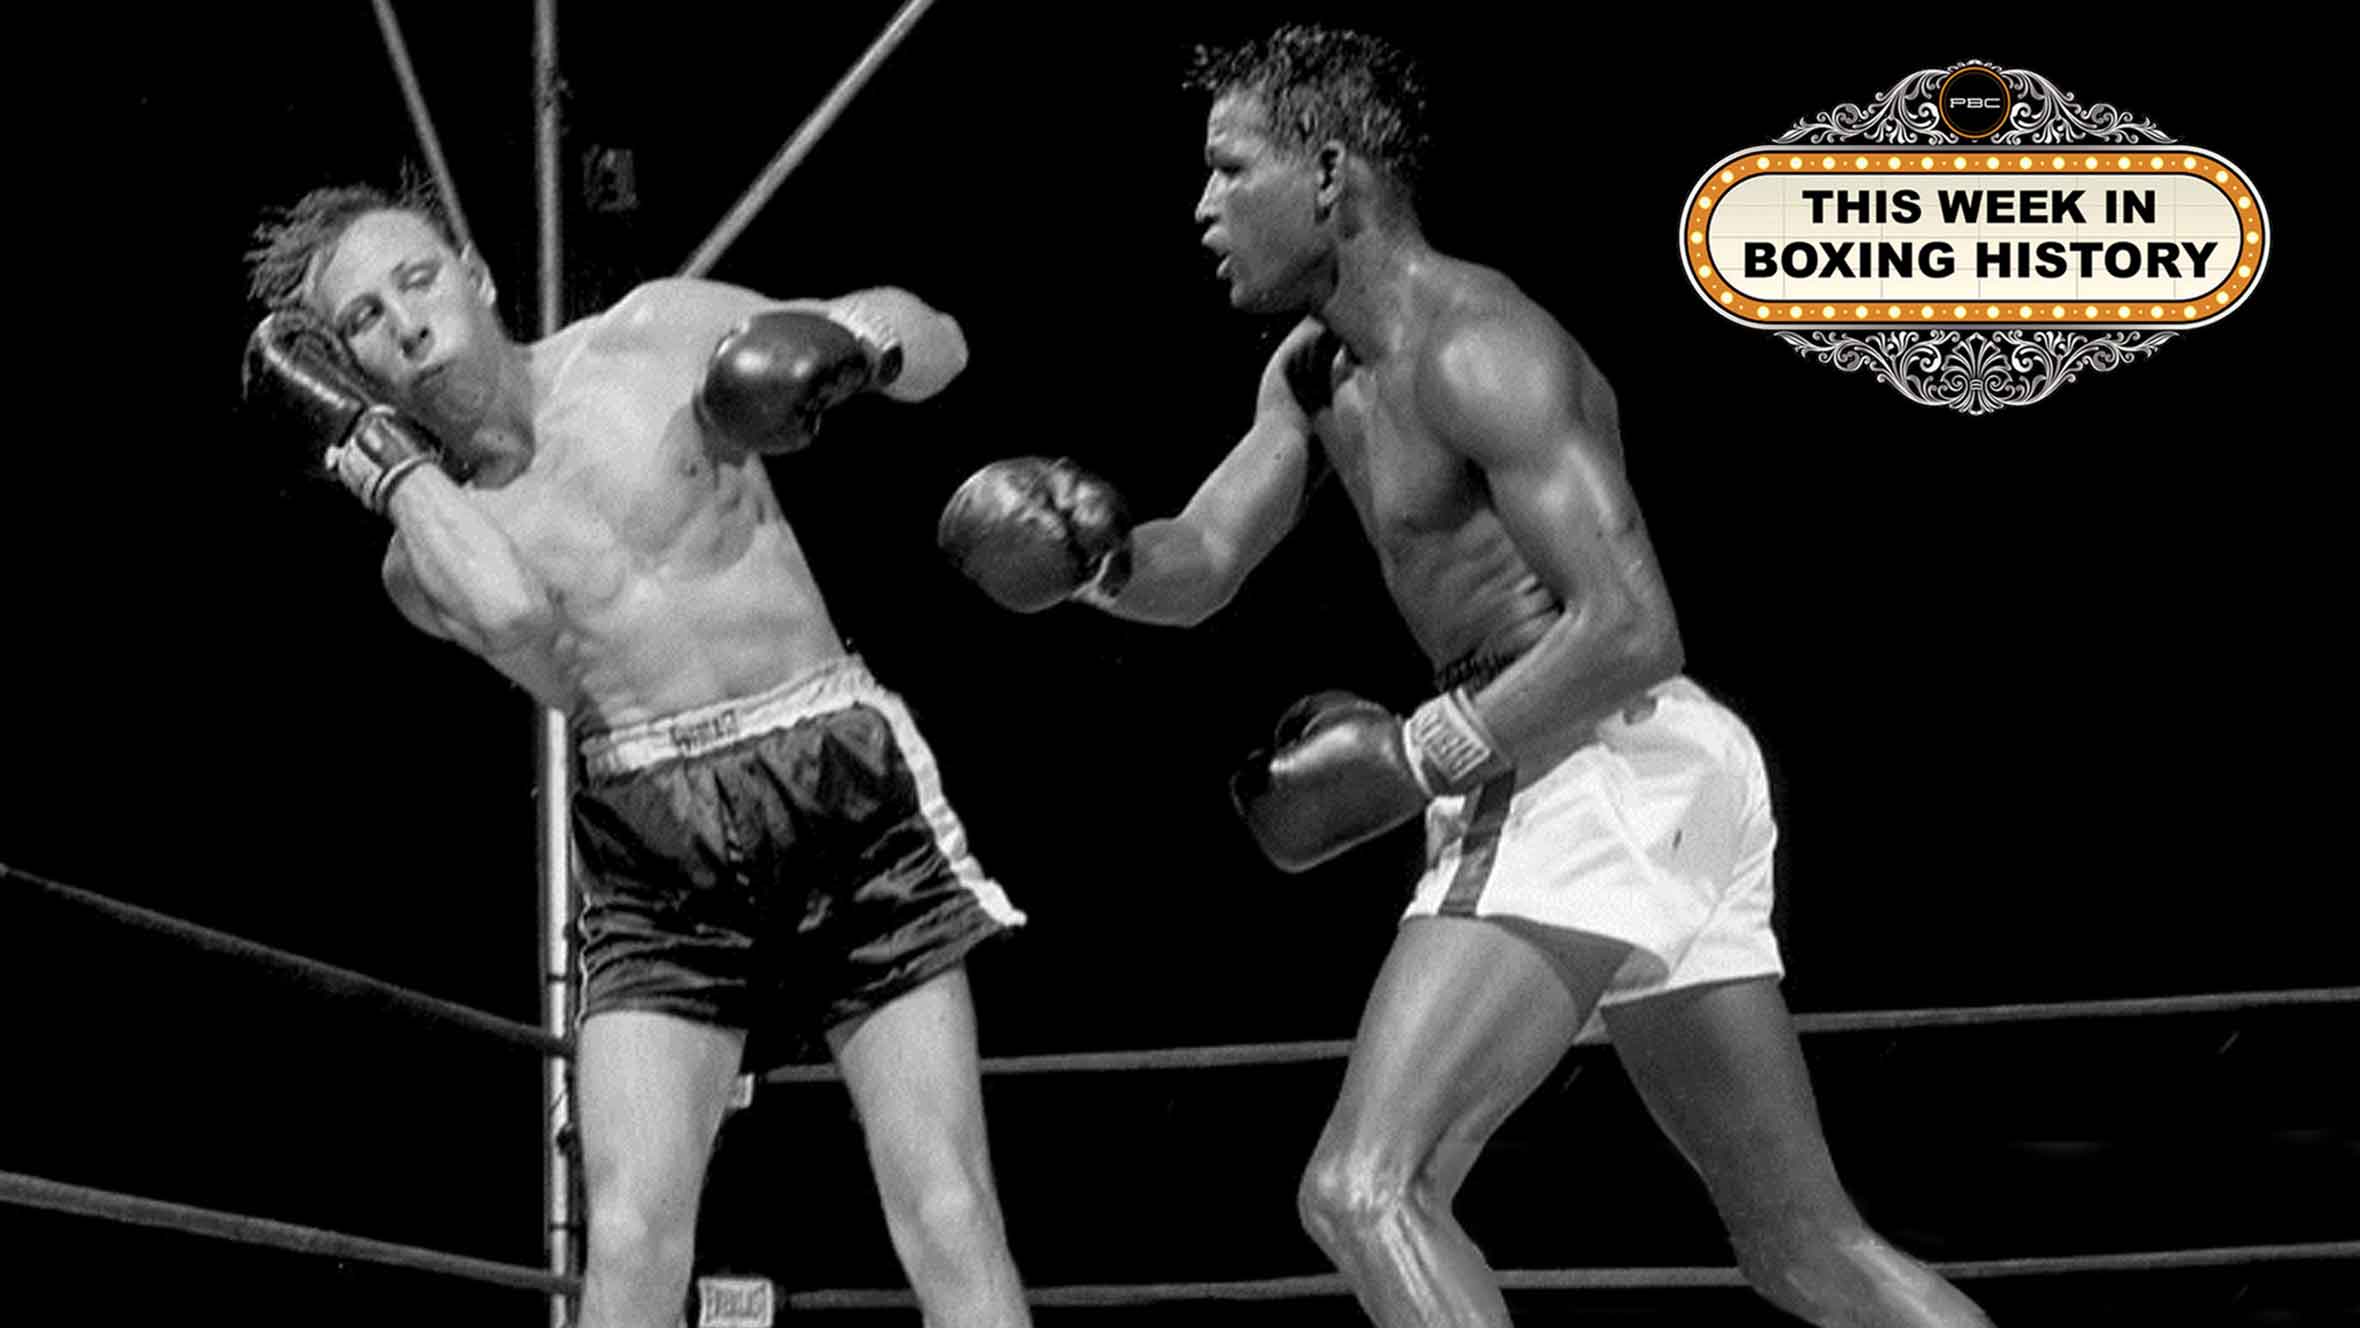 This Week in Boxing History: August 7-13